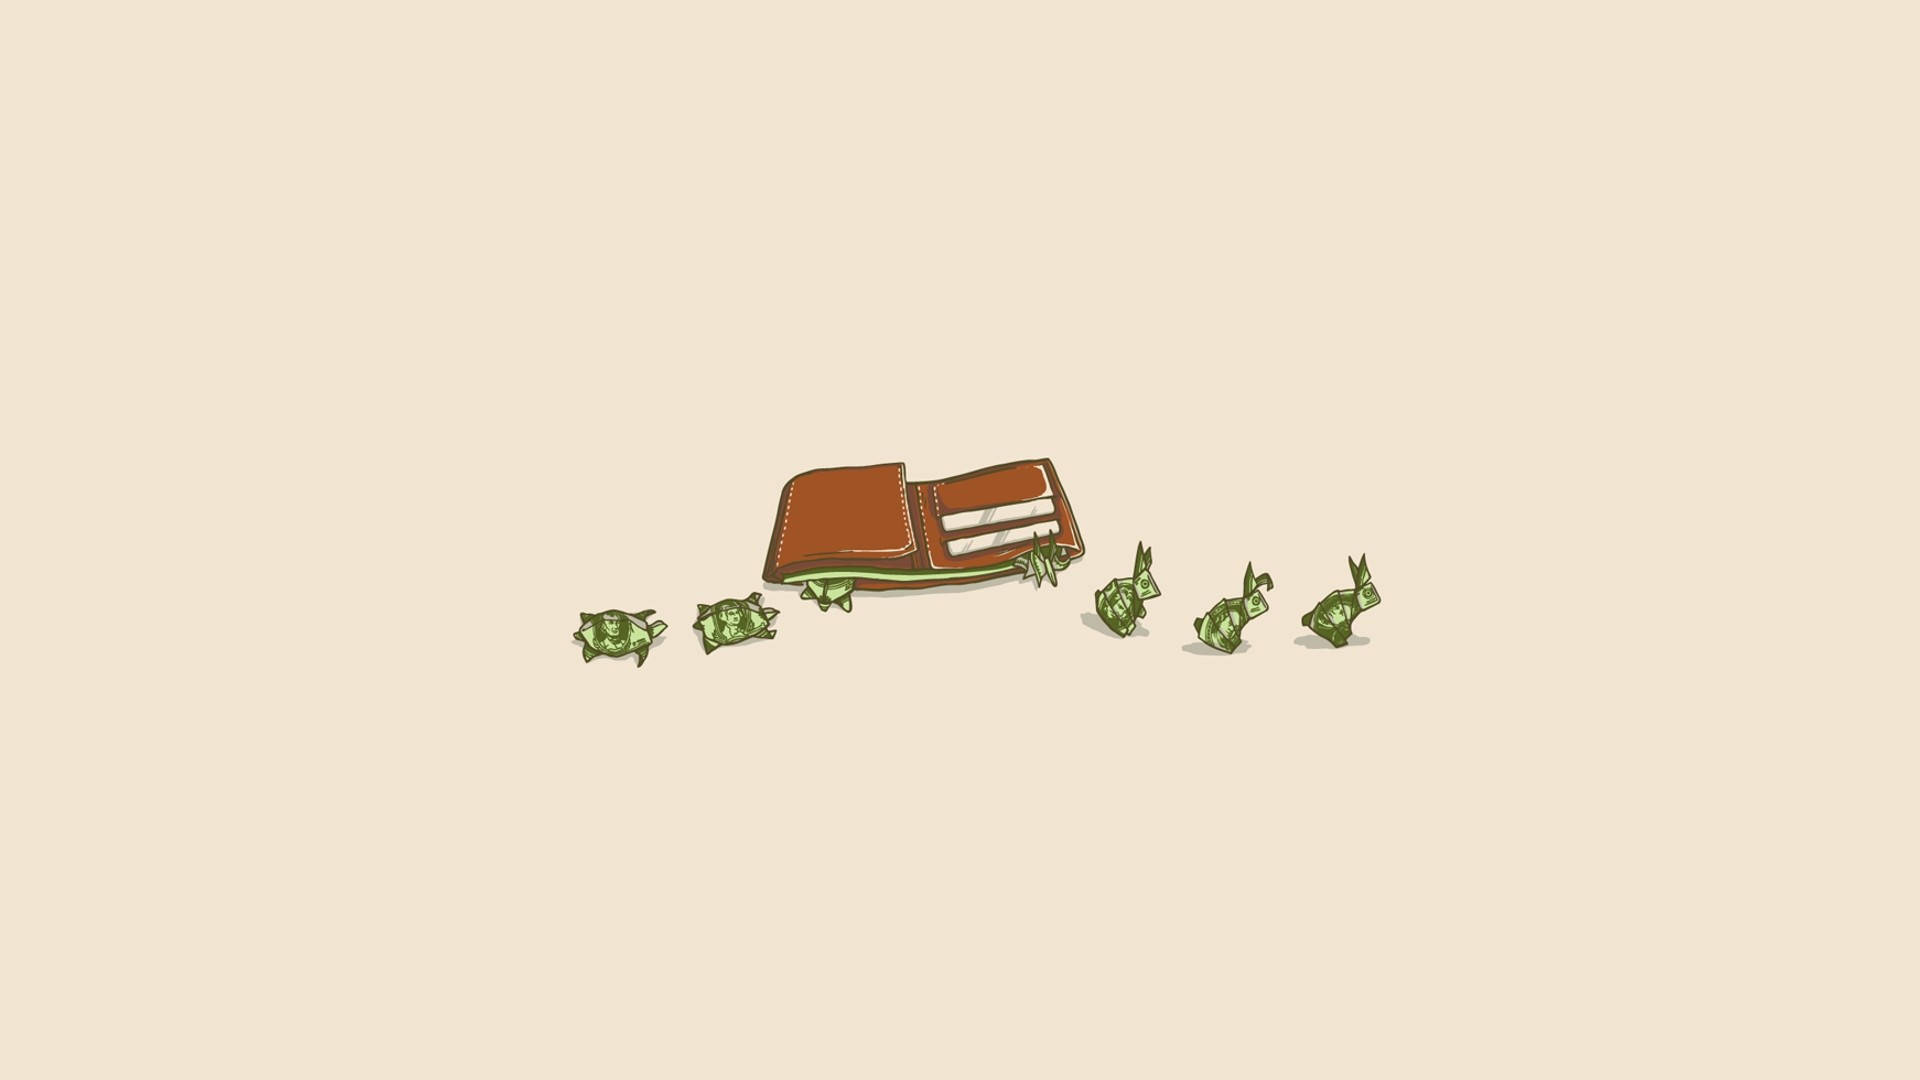 Minimalist Desktop Wallet And Money Insects Wallpaper